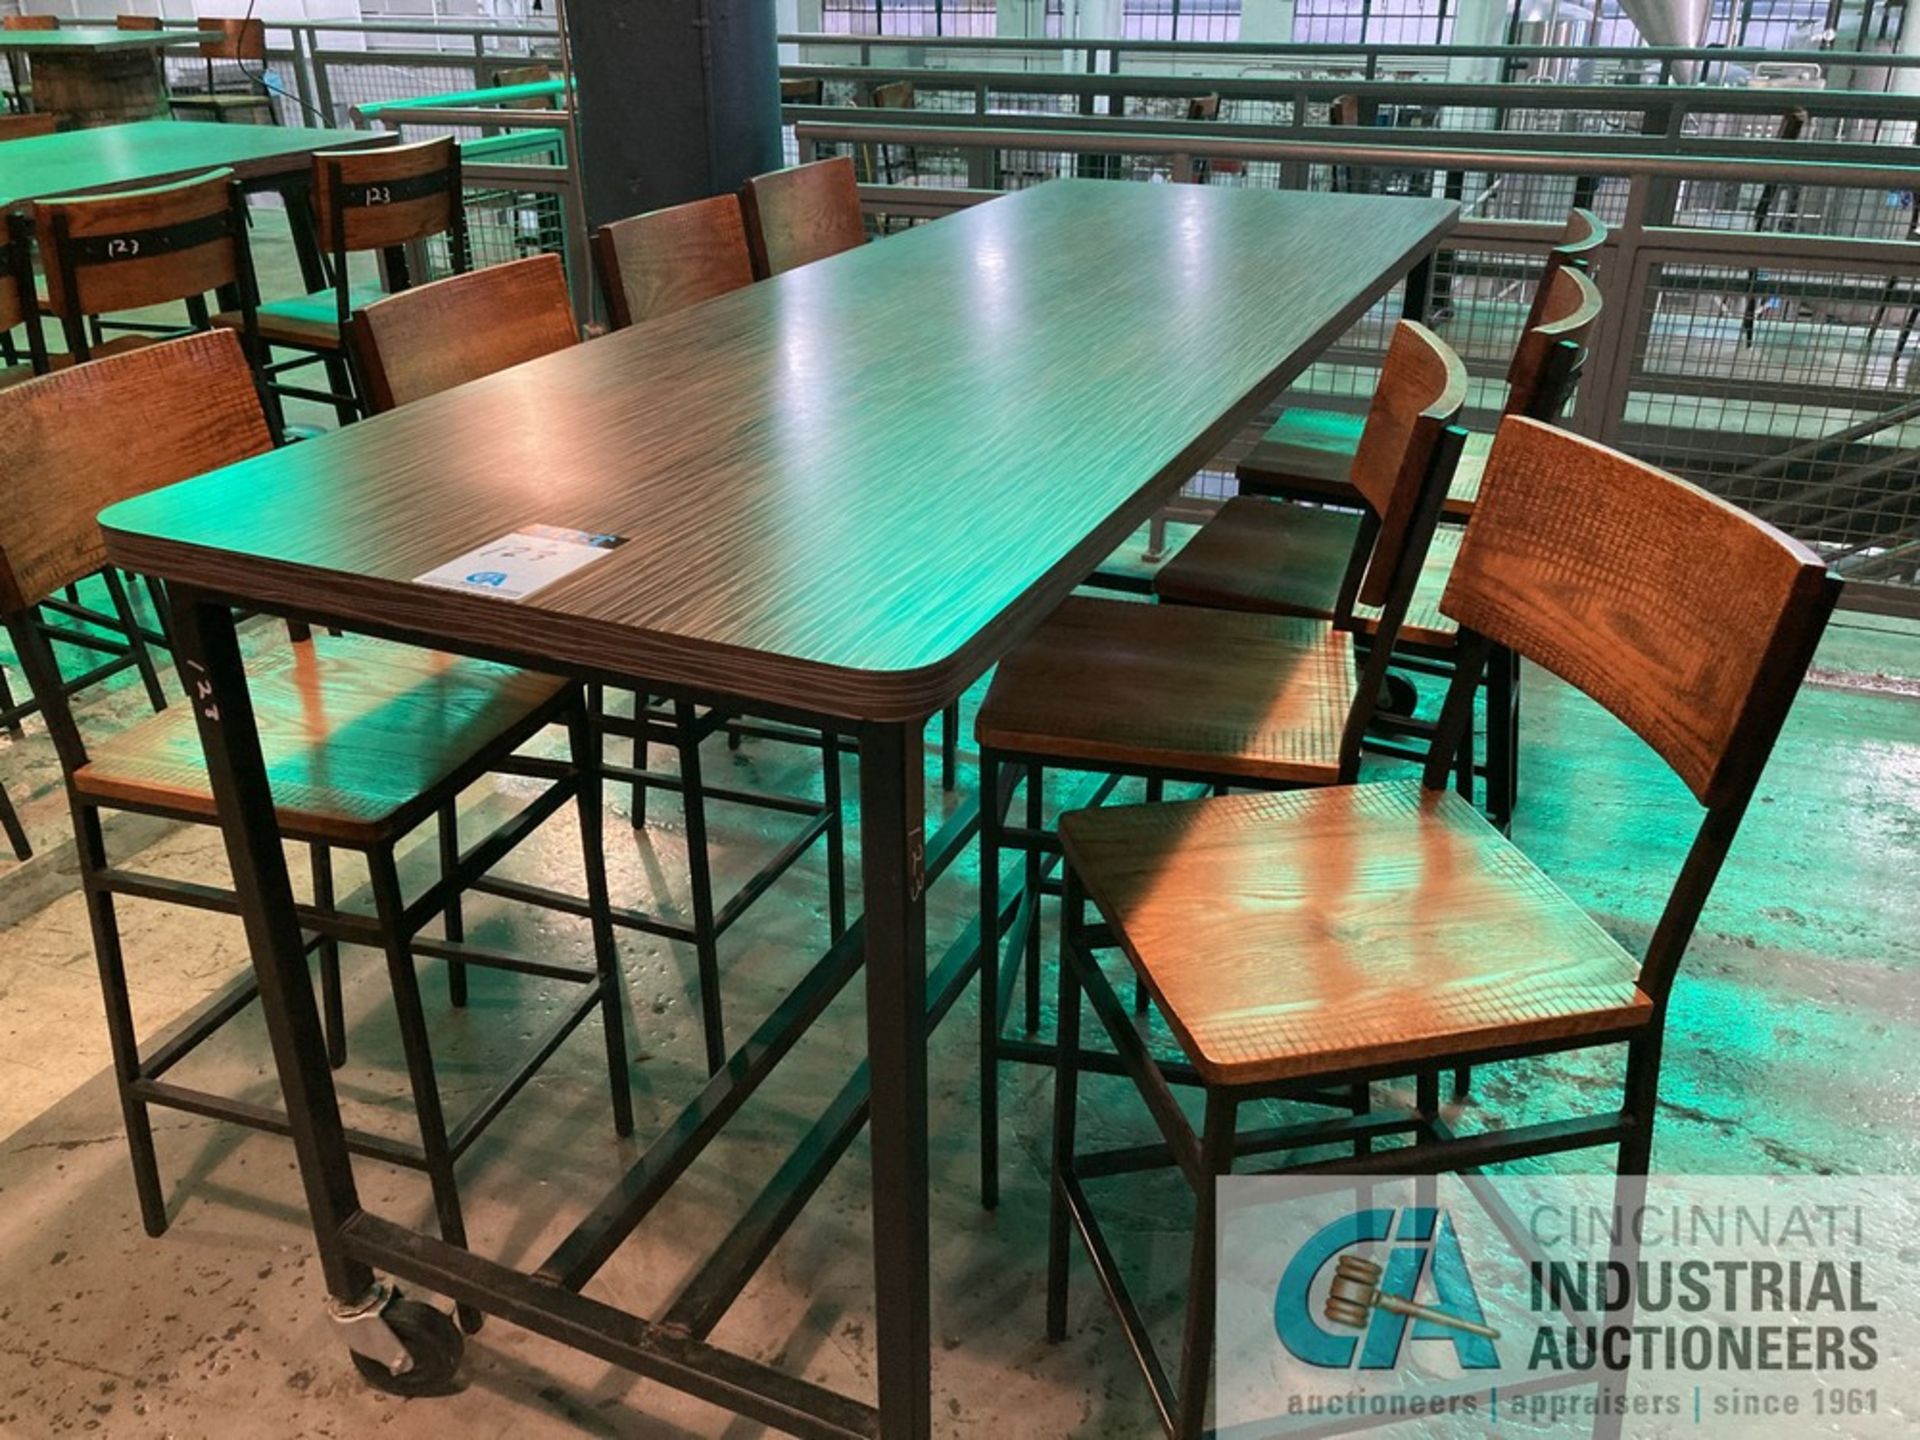 32" X 92" X 43" HIGH PORTABLE TABLE WITH (8) CHAIRS **For convenience, the loading fee of $100.00 - Image 2 of 4